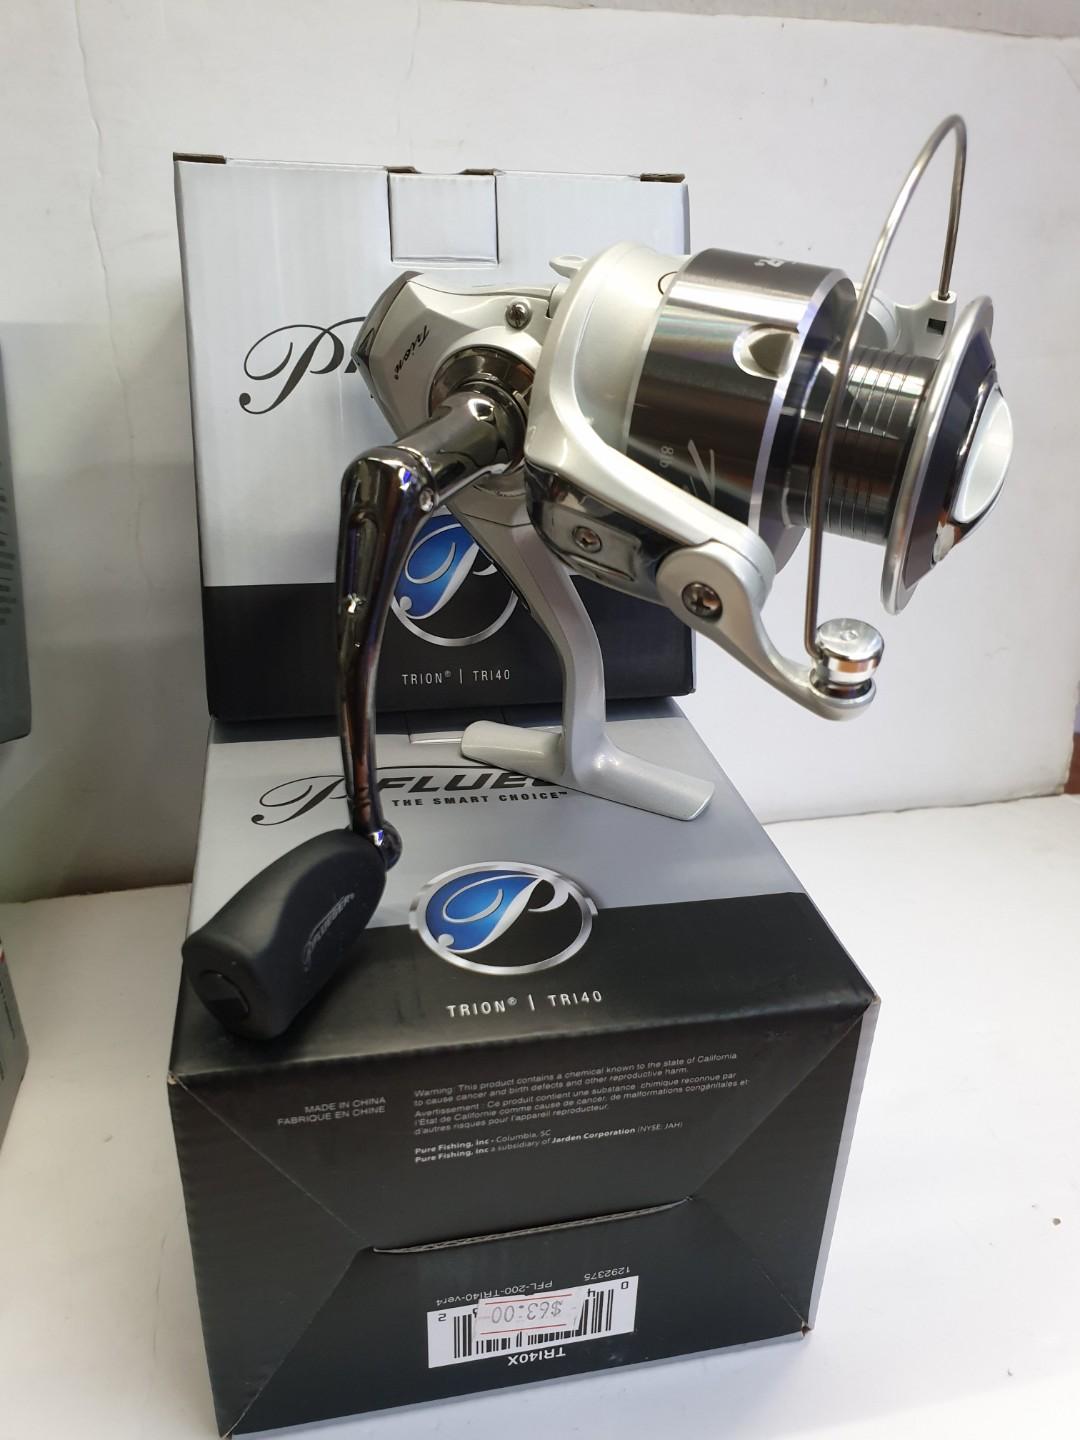 JUST & New Arrival Spinning Reel- Mid End US Version 2020 Model and Just  Launch S.E.A.!!!)= The 'PFLUEGER'- TRION.: D).TRI 35X.(Gear ratio: 5.2:1,  Drag: 4.5kg).= S$61.00/-. E).TRI 40X.(Gear ratio: 5.2:1, Drag: 5.4kg)=